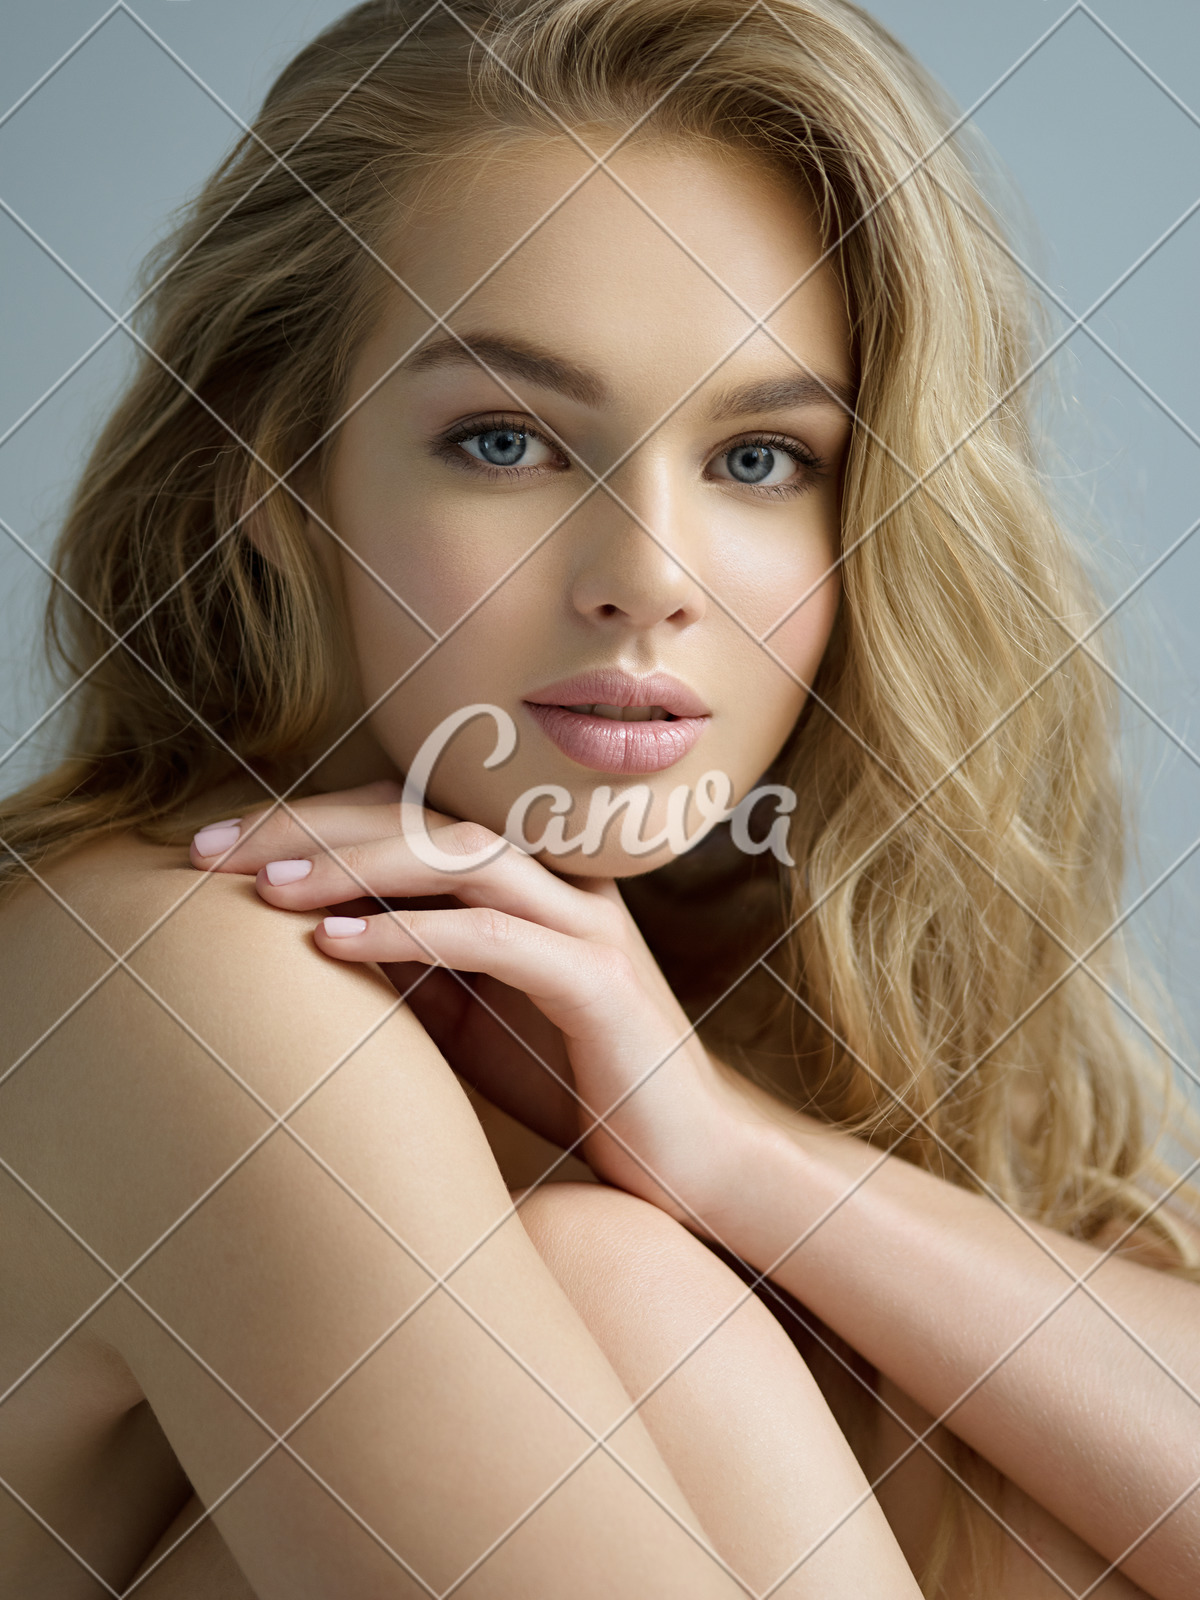 Young Blond Woman With Long Curly Hair Photos By Canva